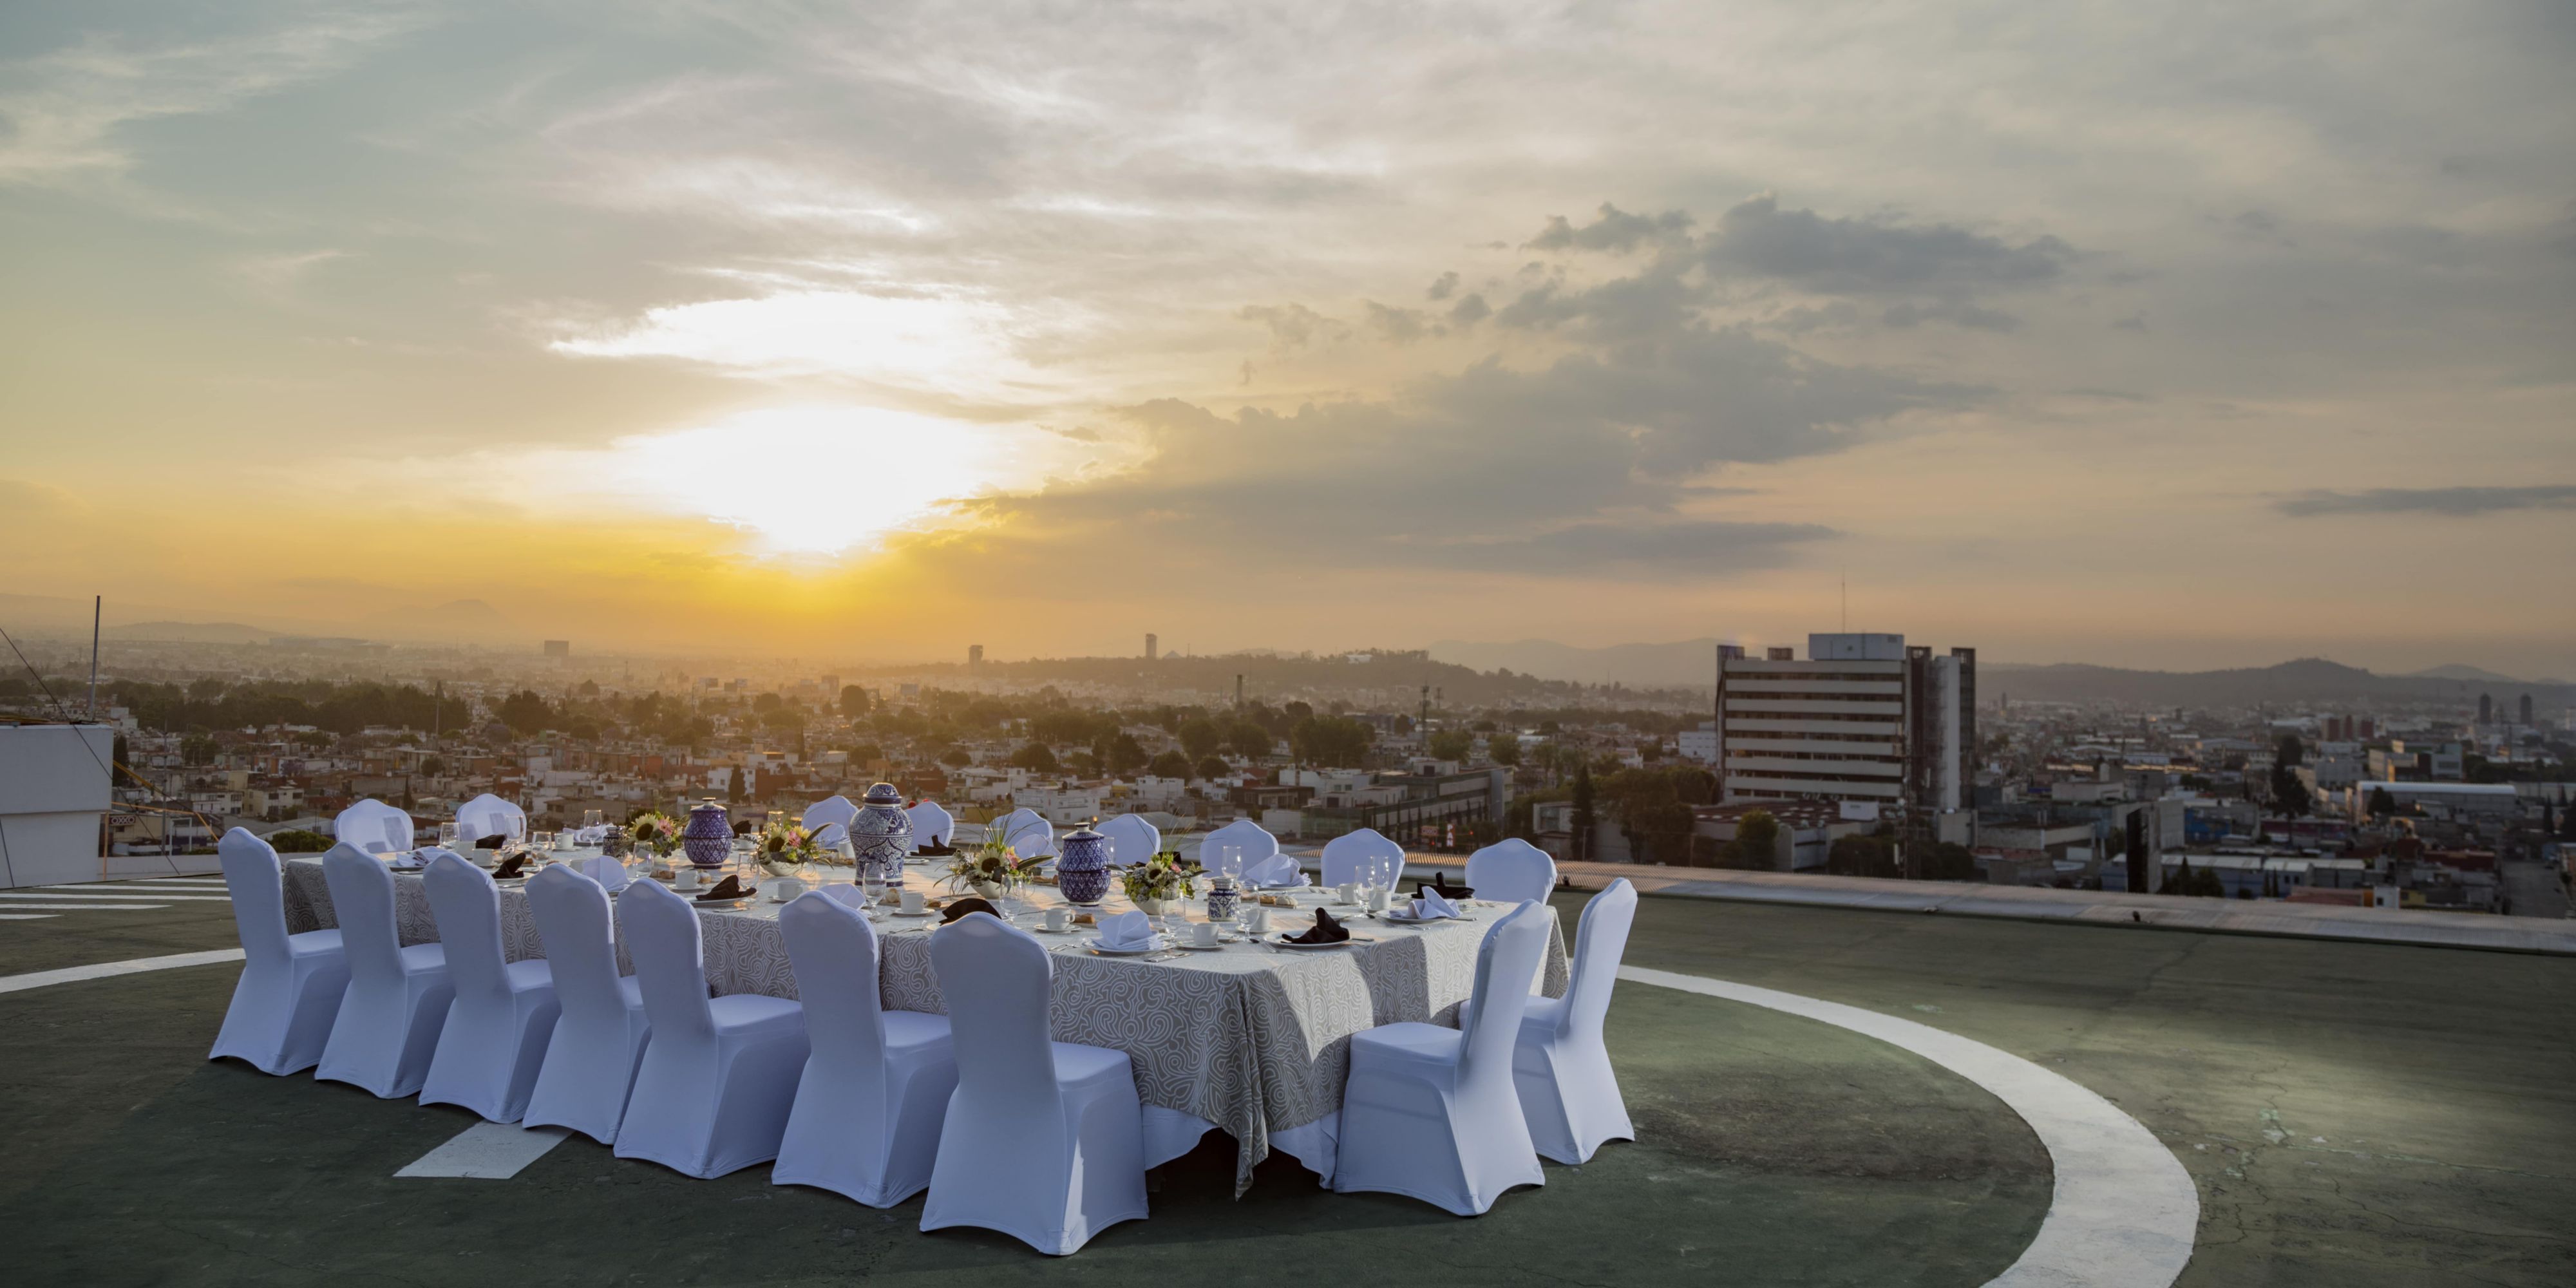 Host your corporate events at our exclusive heliport that offers first class services and breathtaking views, along with a hotel for corporate events. Experience a unique blend of comfort and luxury at our heliport in Puebla.